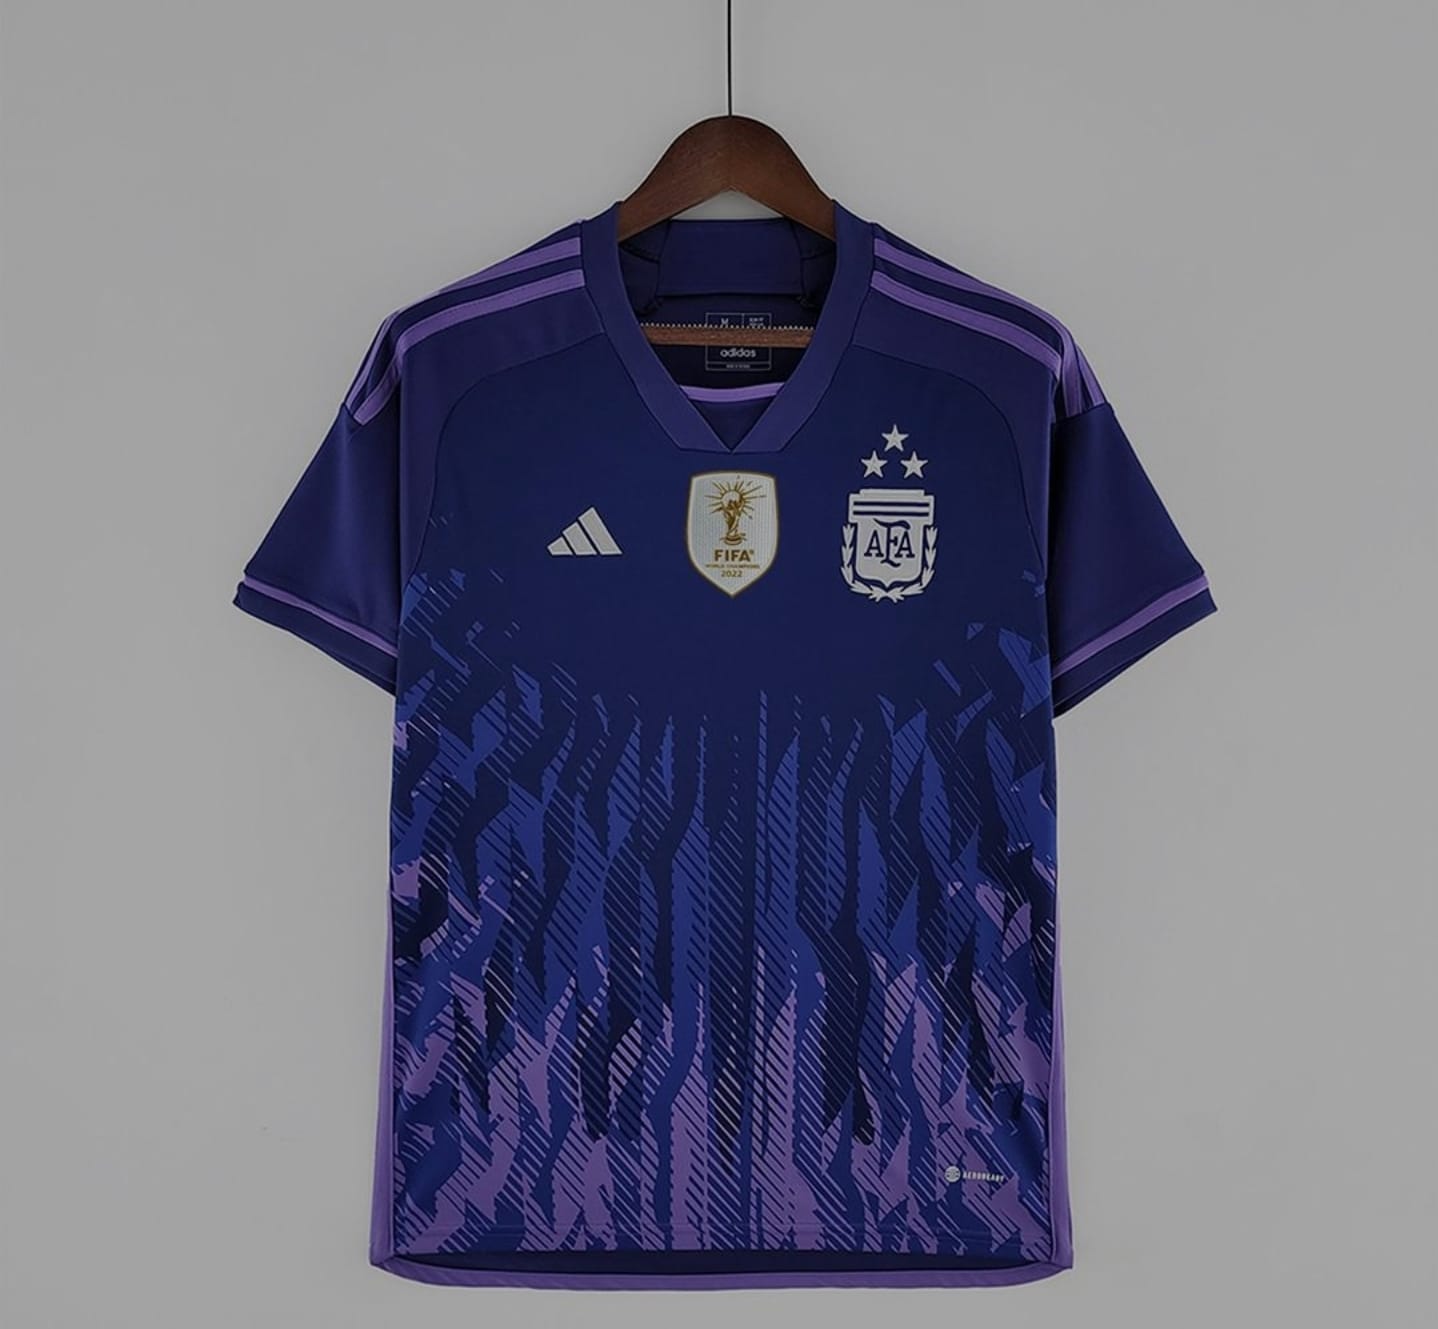 Argentina world cup winner Jersey with 3 star patches FAN Version